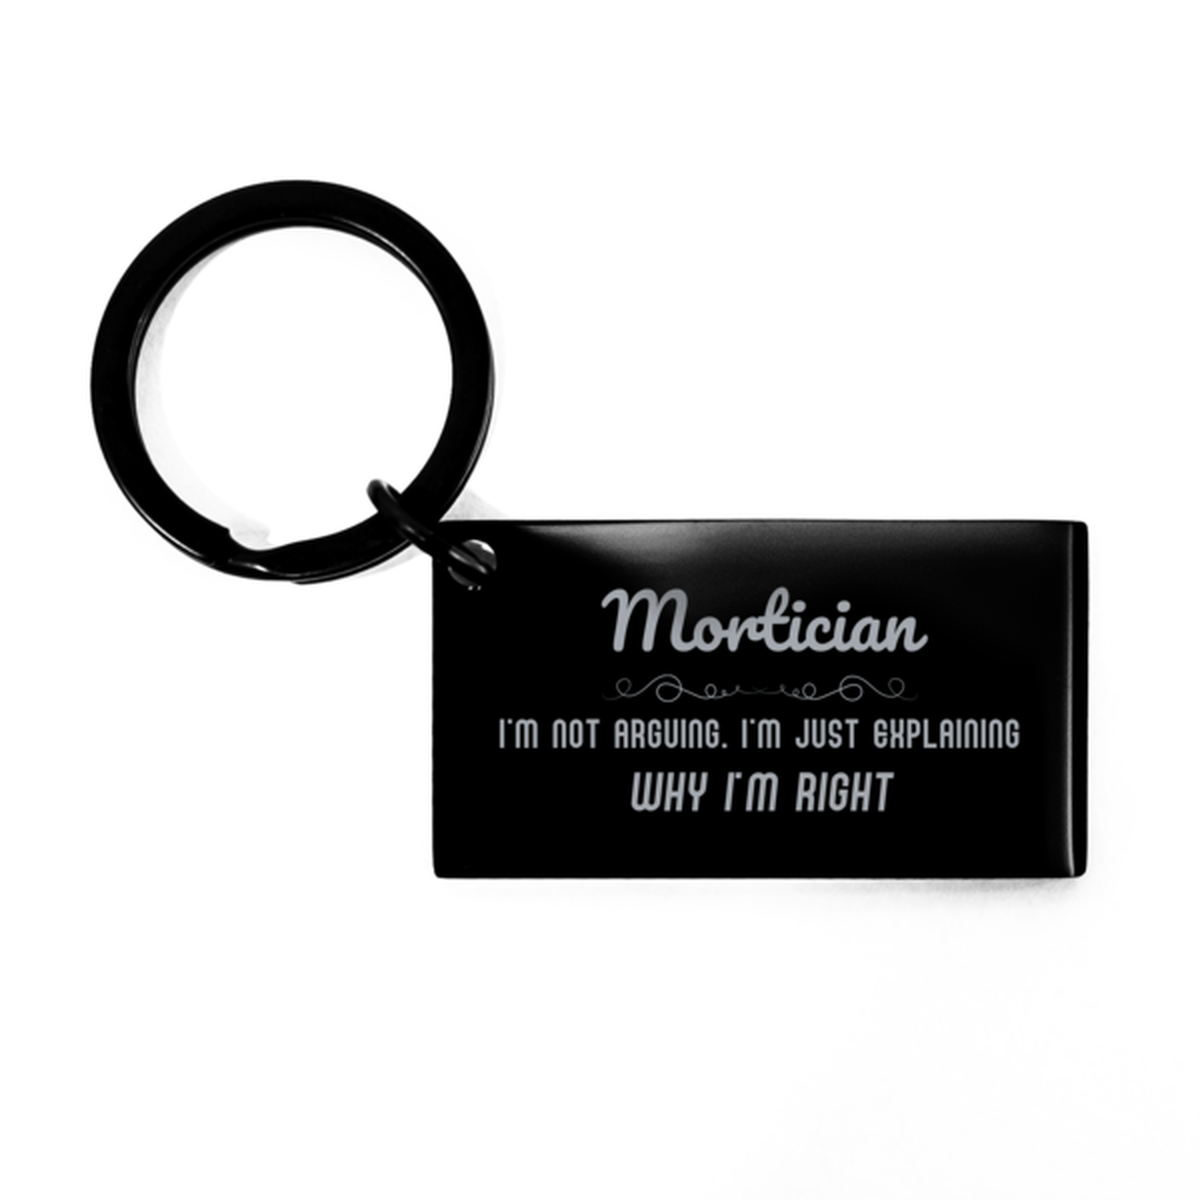 Mortician I'm not Arguing. I'm Just Explaining Why I'm RIGHT Keychain, Funny Saying Quote Mortician Gifts For Mortician Graduation Birthday Christmas Gifts for Men Women Coworker